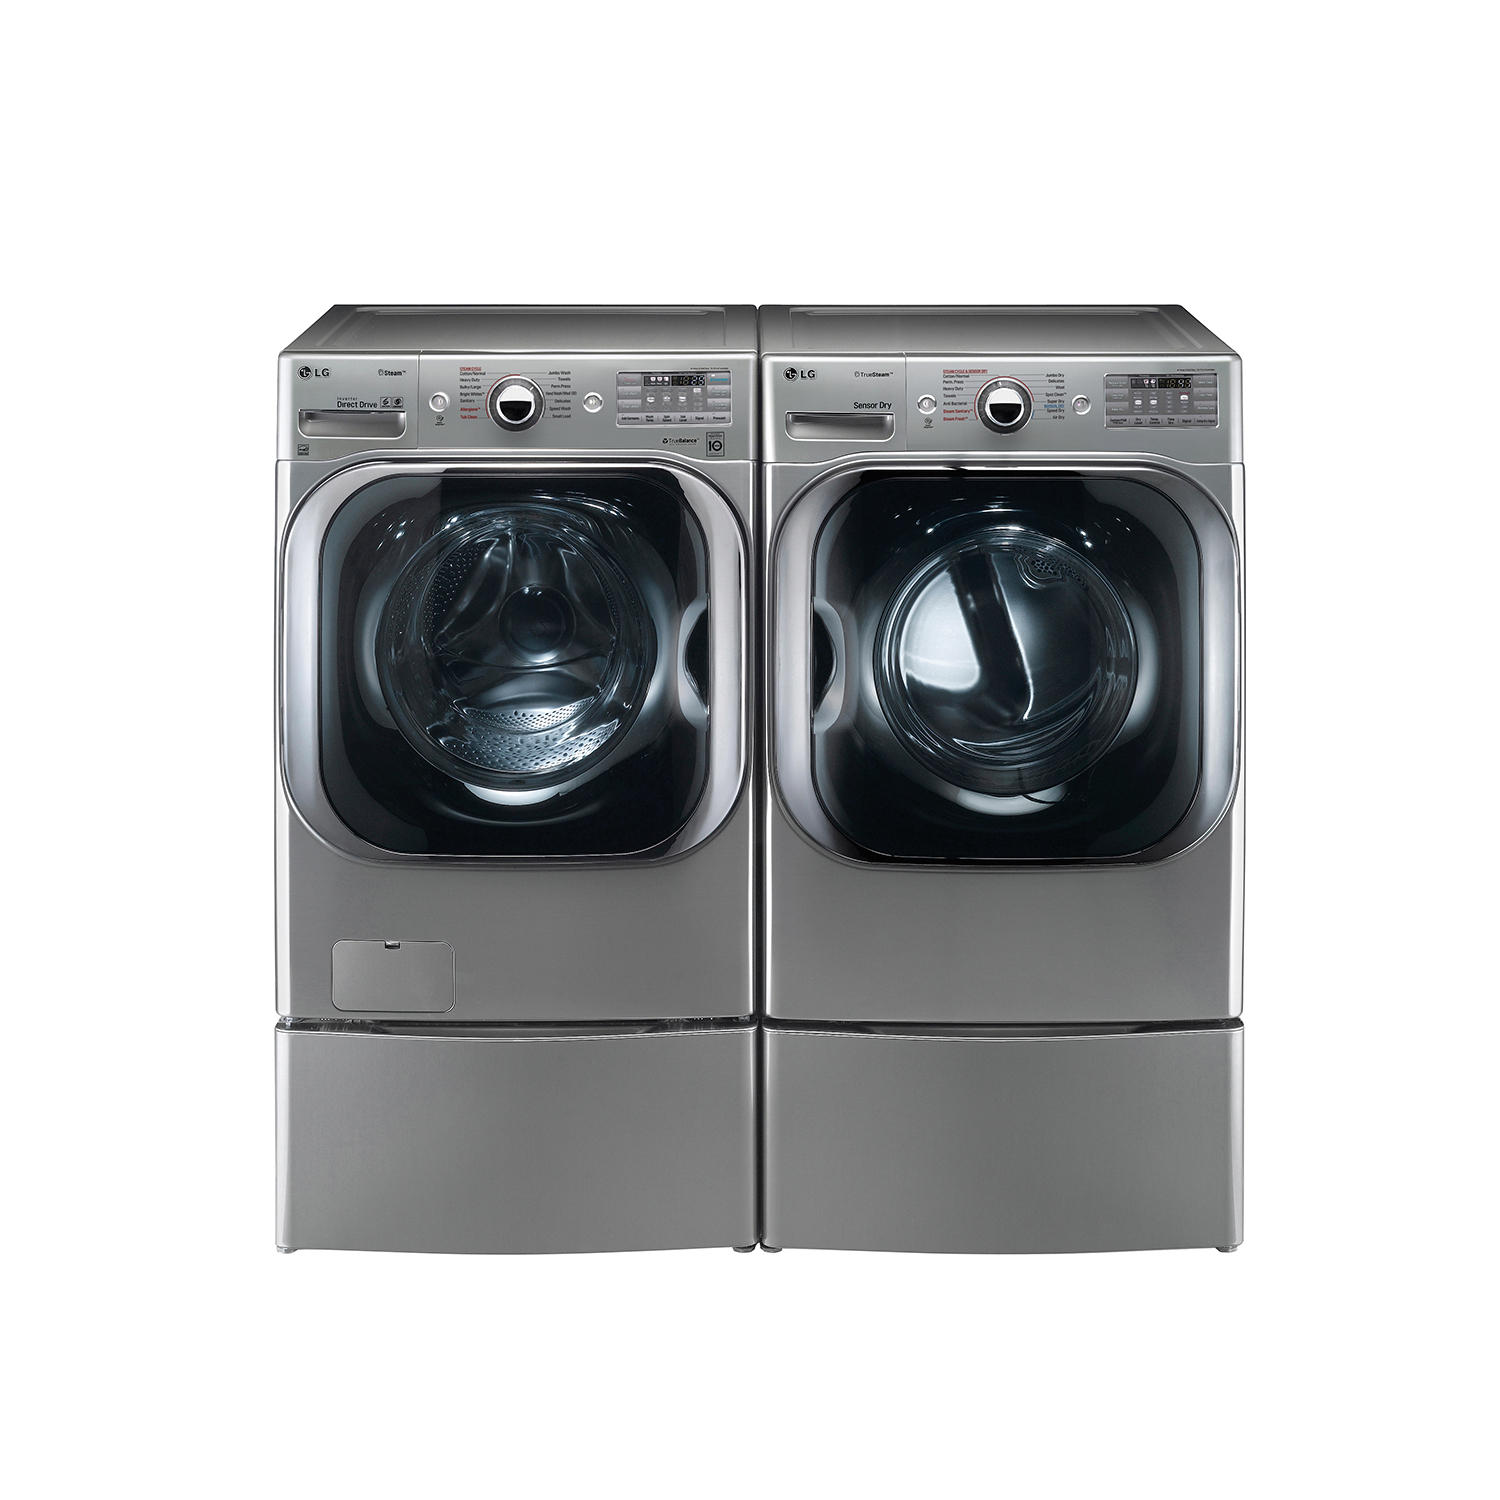 LG WM8100HVA Mega-Capacity Front-Load Washer with Laundry Pedestal and LG DLEX8100V Electric Dryer with Laundry Pedestal Bundle in Graphite Steel